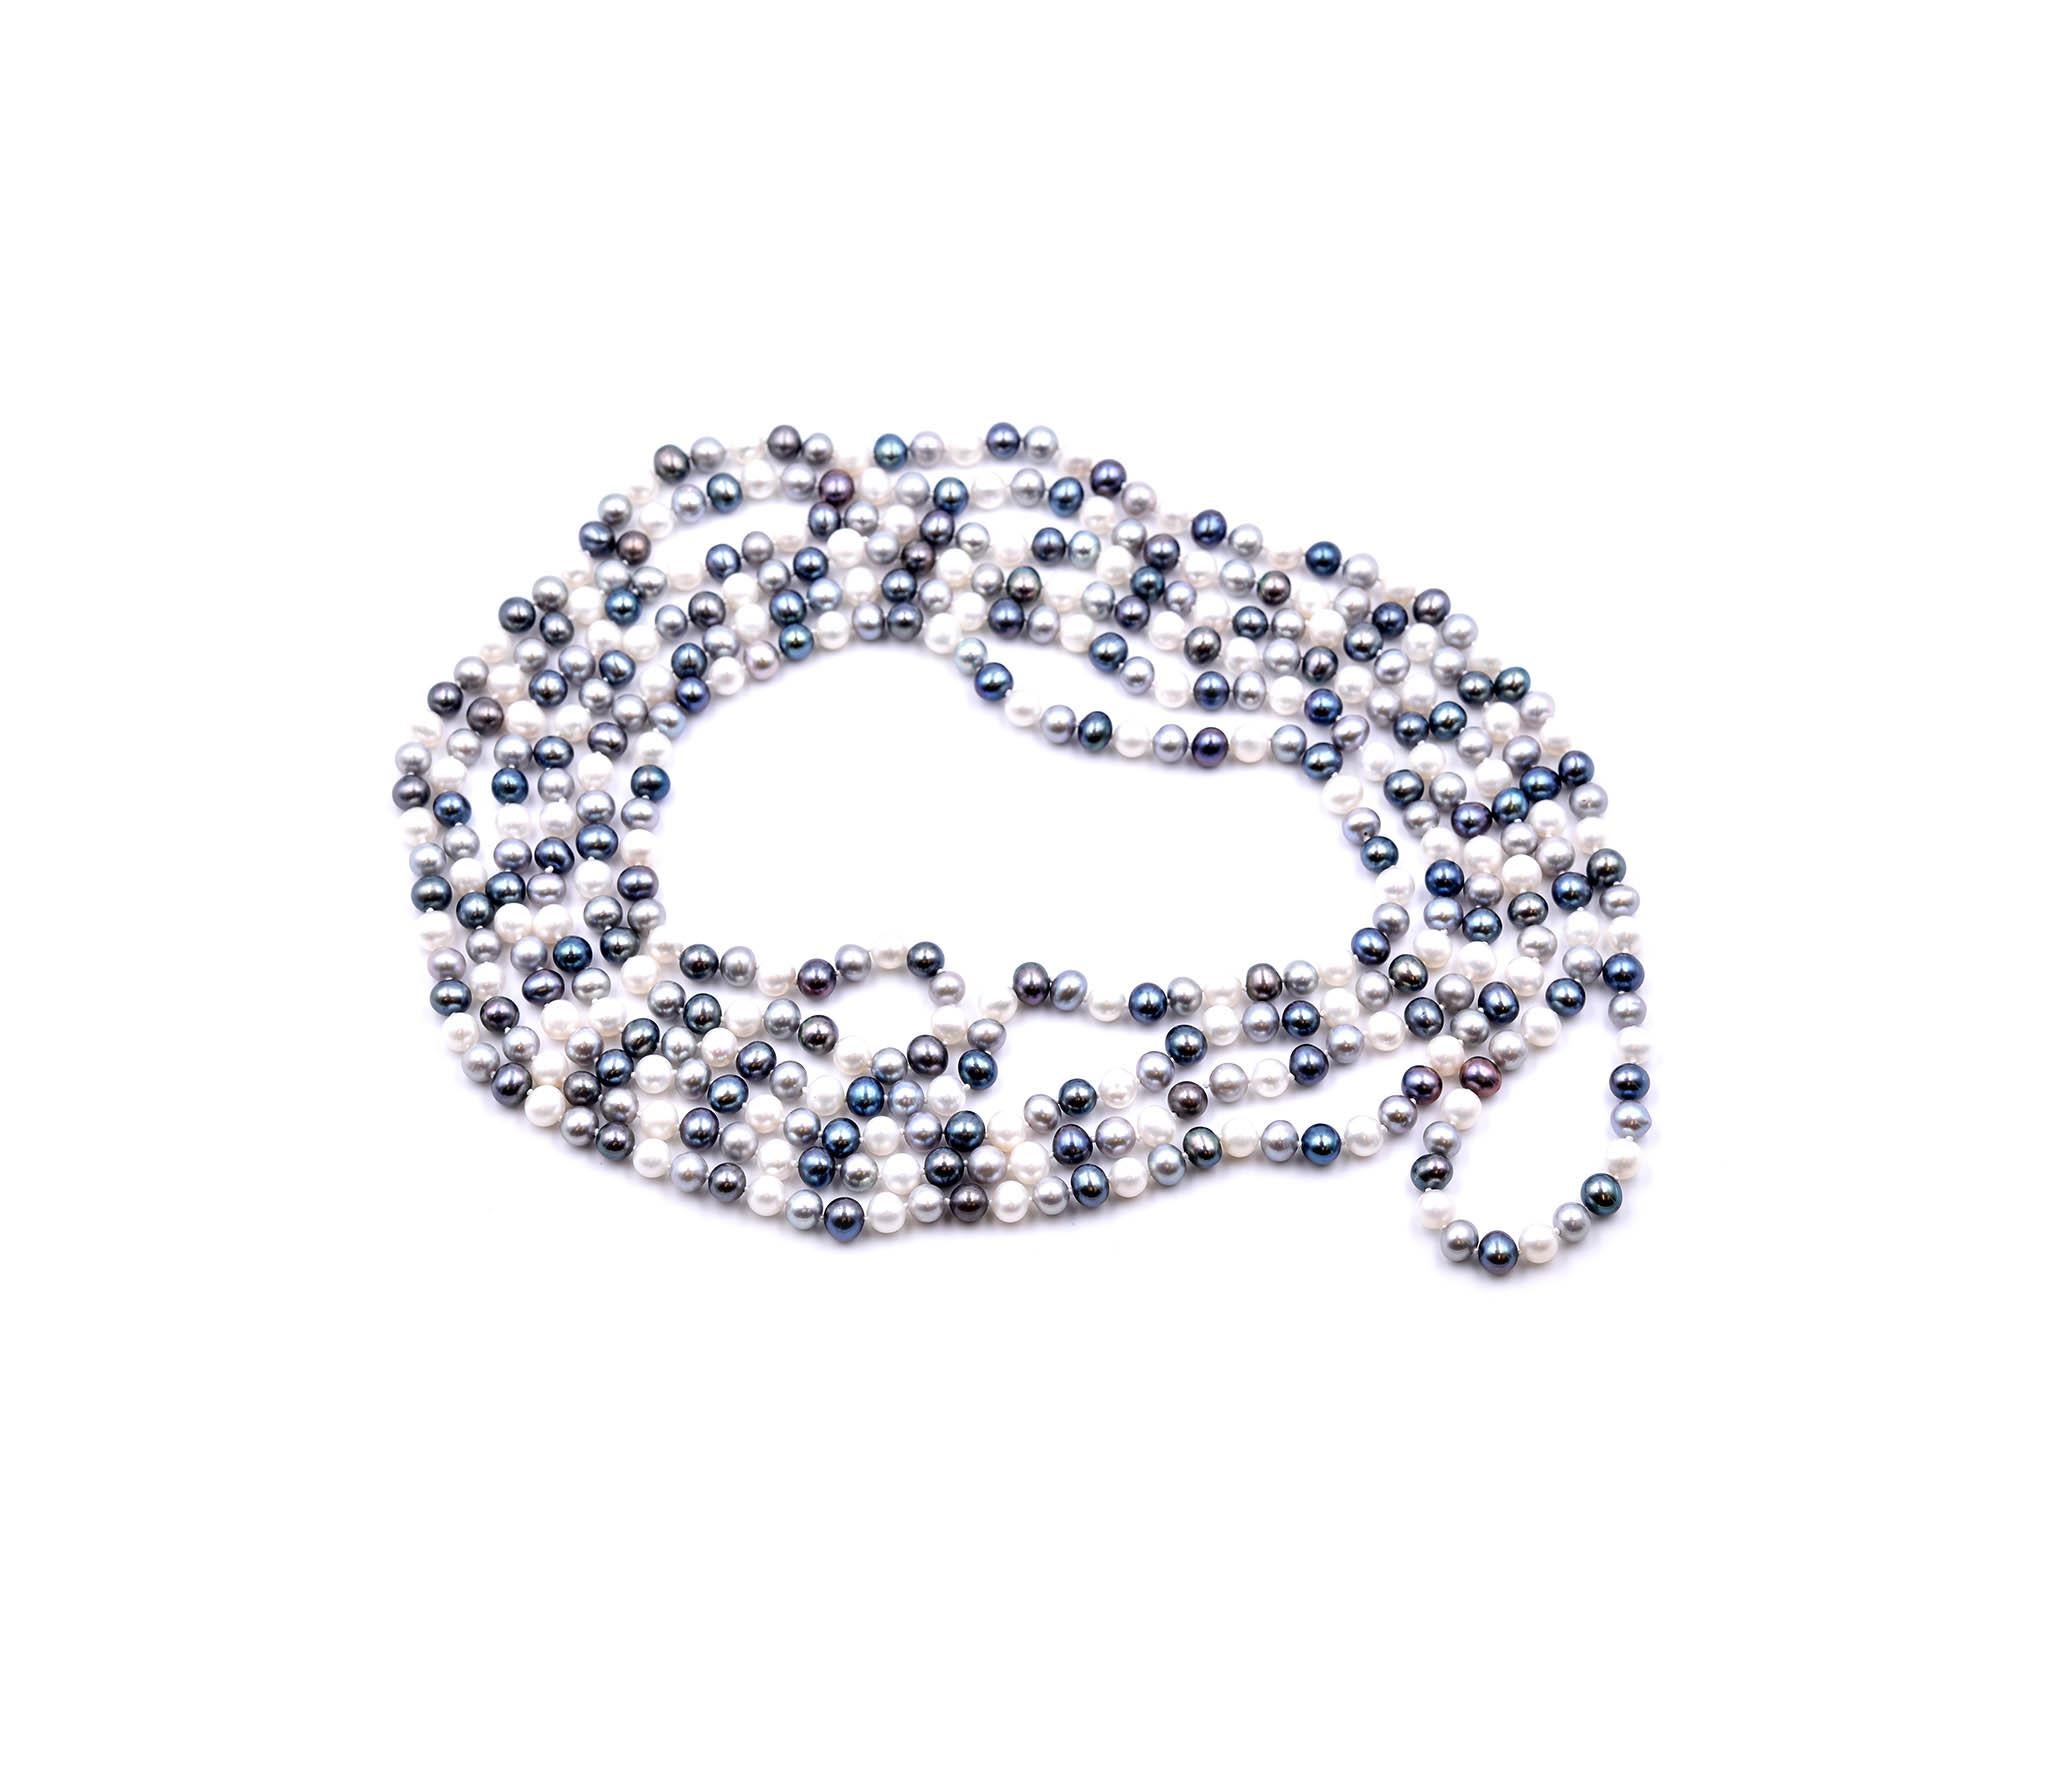 Designer: custom design
Pearls: 6.40m-7.00mm
Dimensions: necklace is 105-inches long
Weight: 137.89 grams
